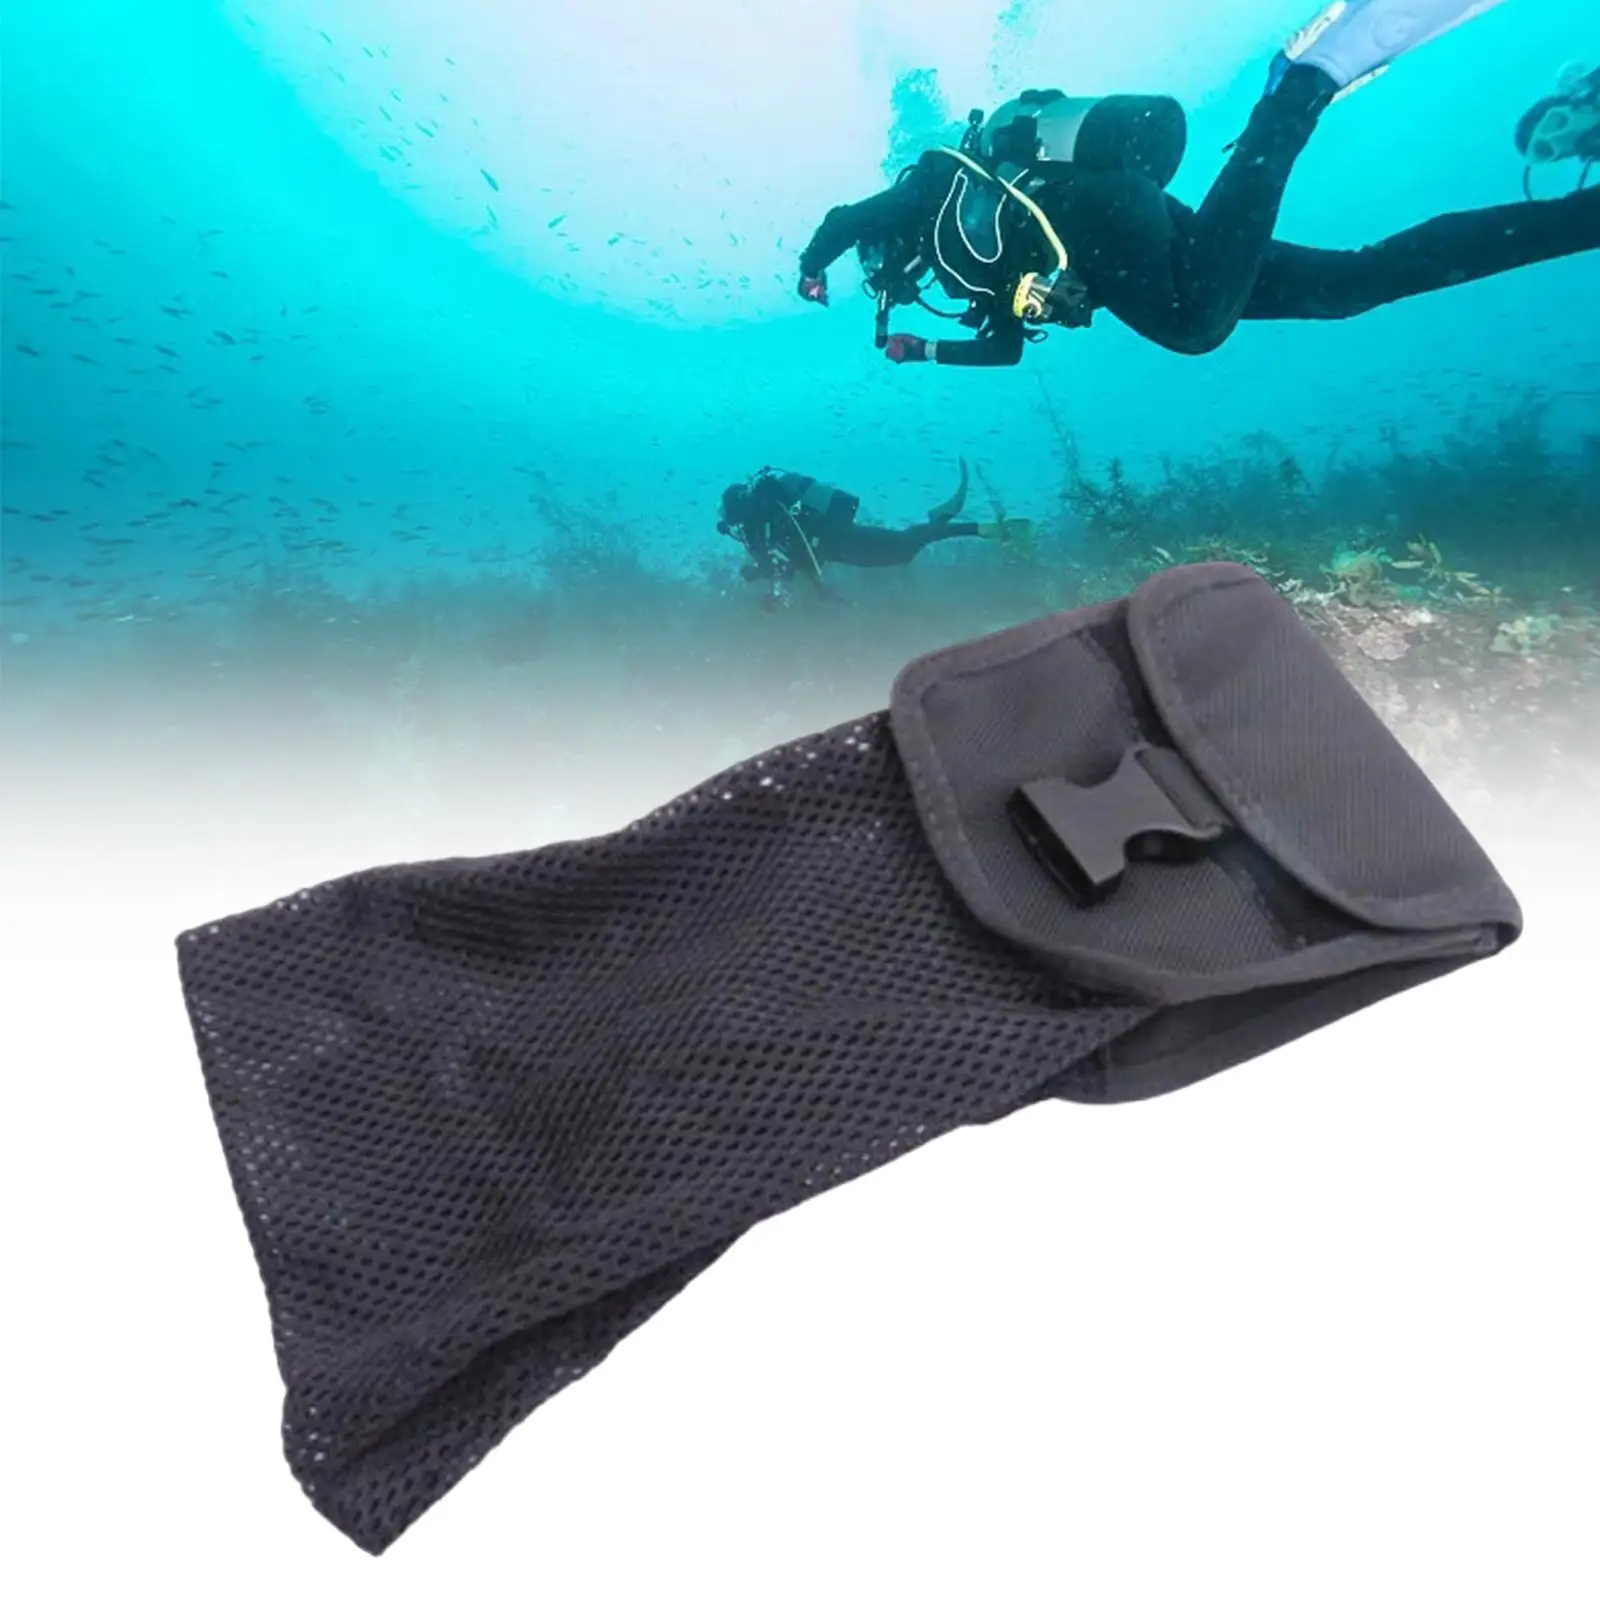 Gear Bag Storage Holder Pack Snorkelling Carry Nylon Scuba Diving Mesh Pouch for Flippers Compass Keys Collecting 